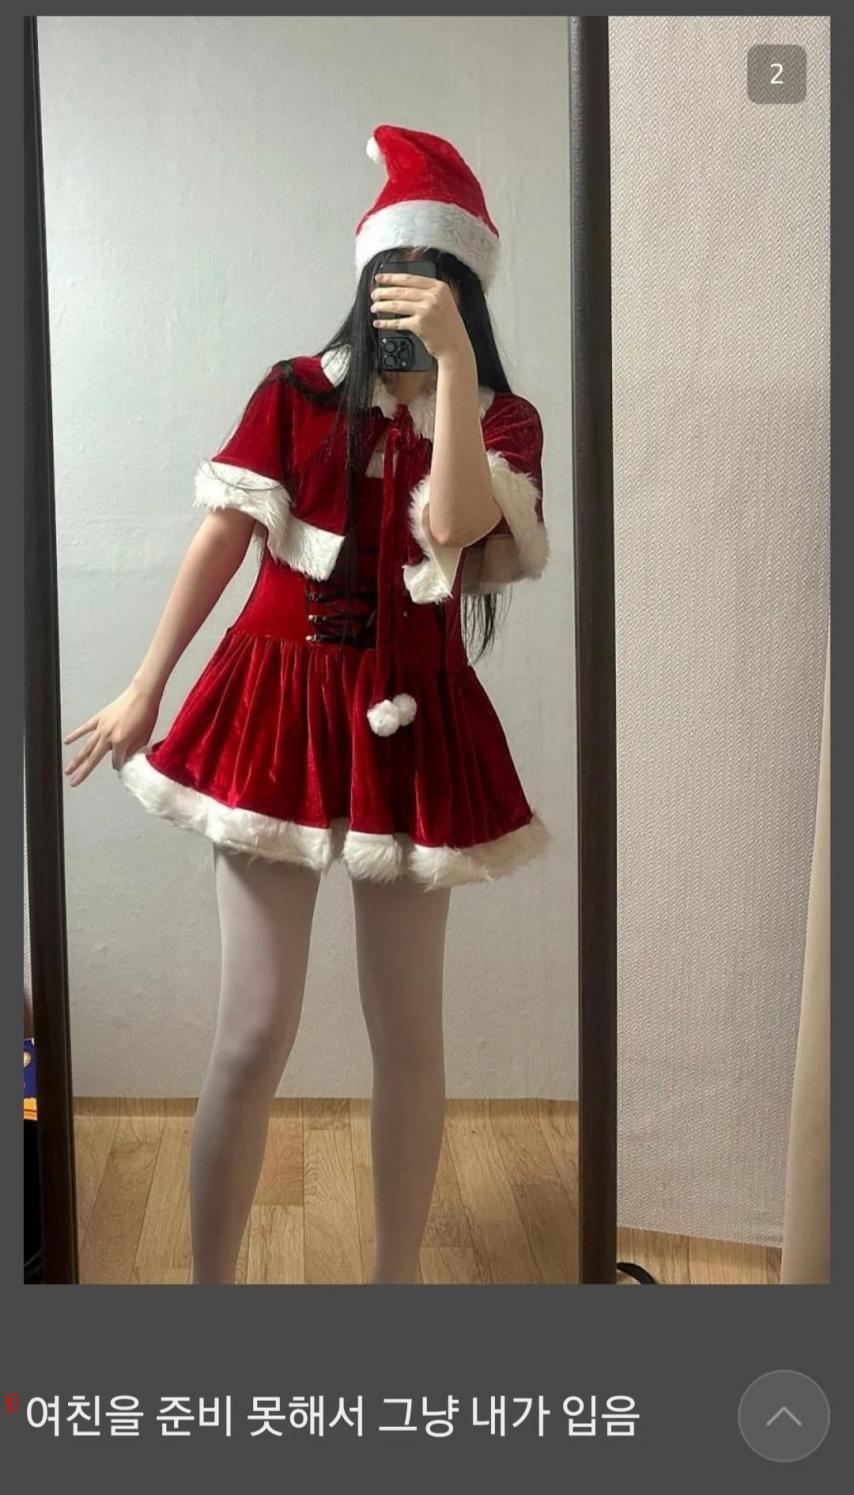 Santa's clothes for my girlfriend